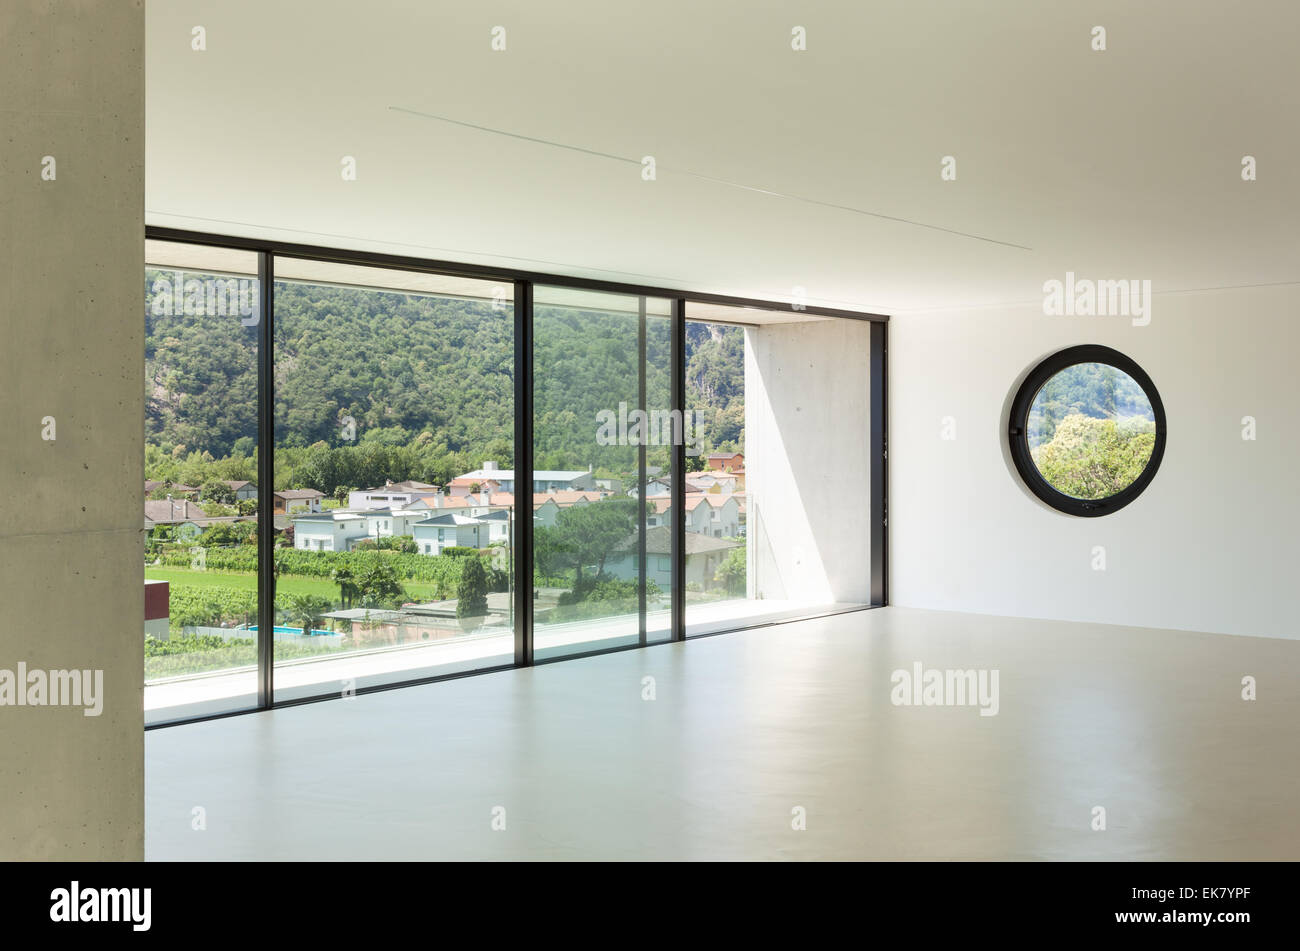 House, interior, modern architecture, wide room, view from window Stock Photo